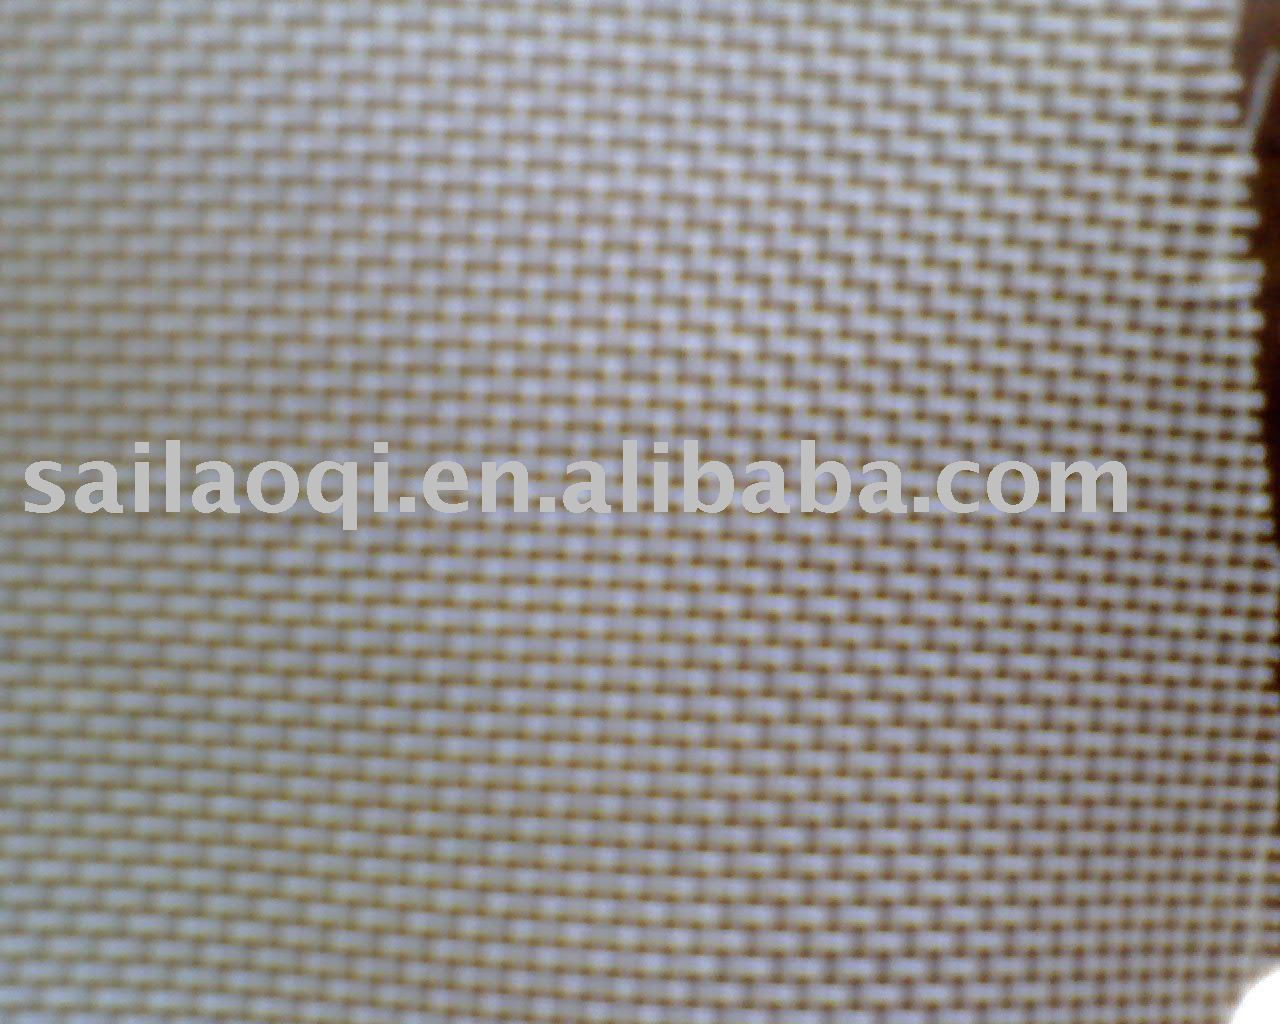 Home Products Nylon Screen 64